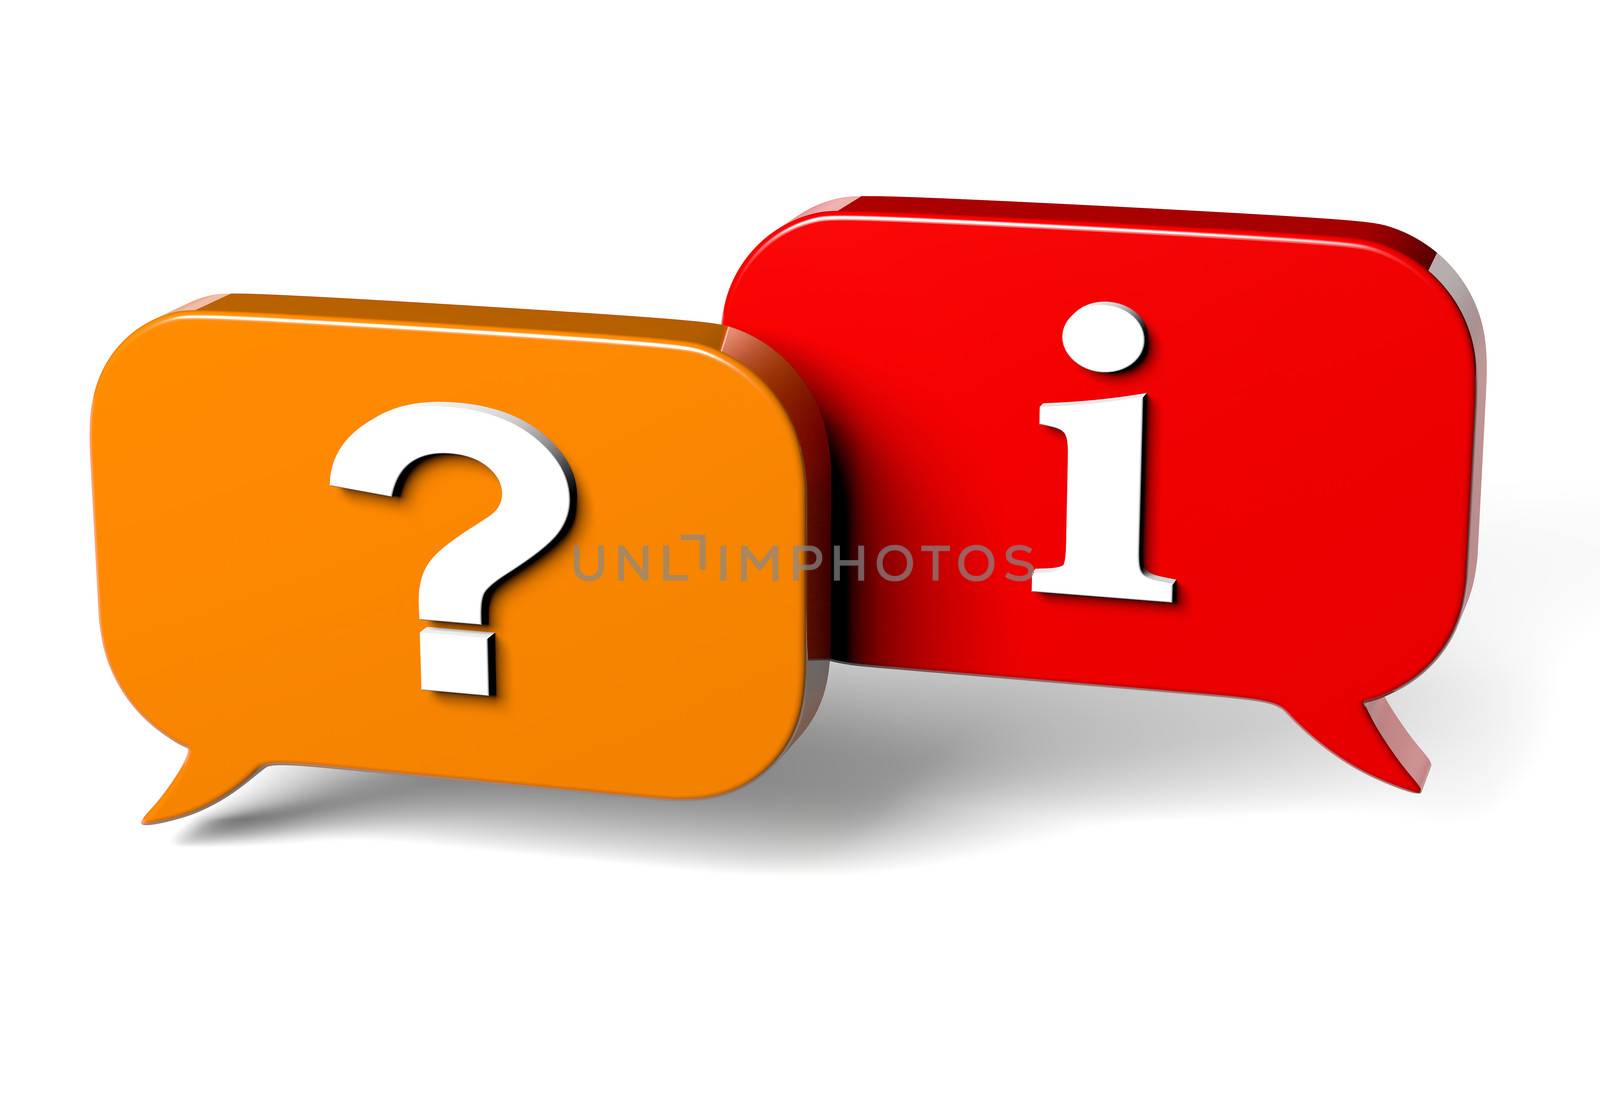 Orange Yellow and Red Bubble Speech on White Background Question Mark and Info Sign Concept 3D Illustration